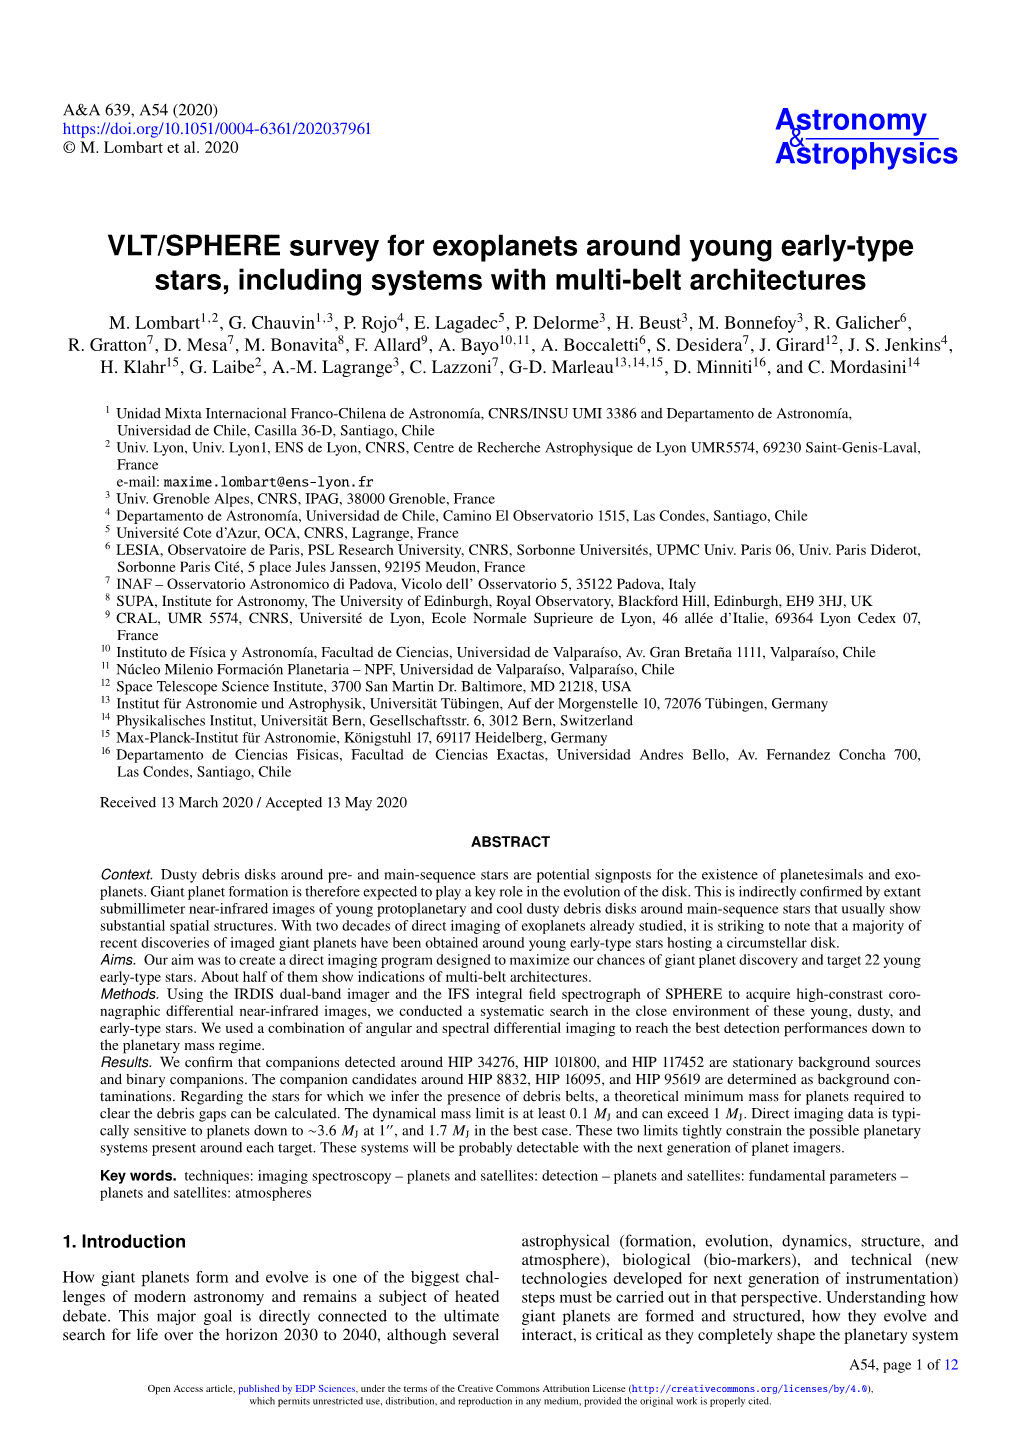 VLT/SPHERE Survey for Exoplanets Around Young Early-Type Stars, Including Systems with Multi-Belt Architectures M